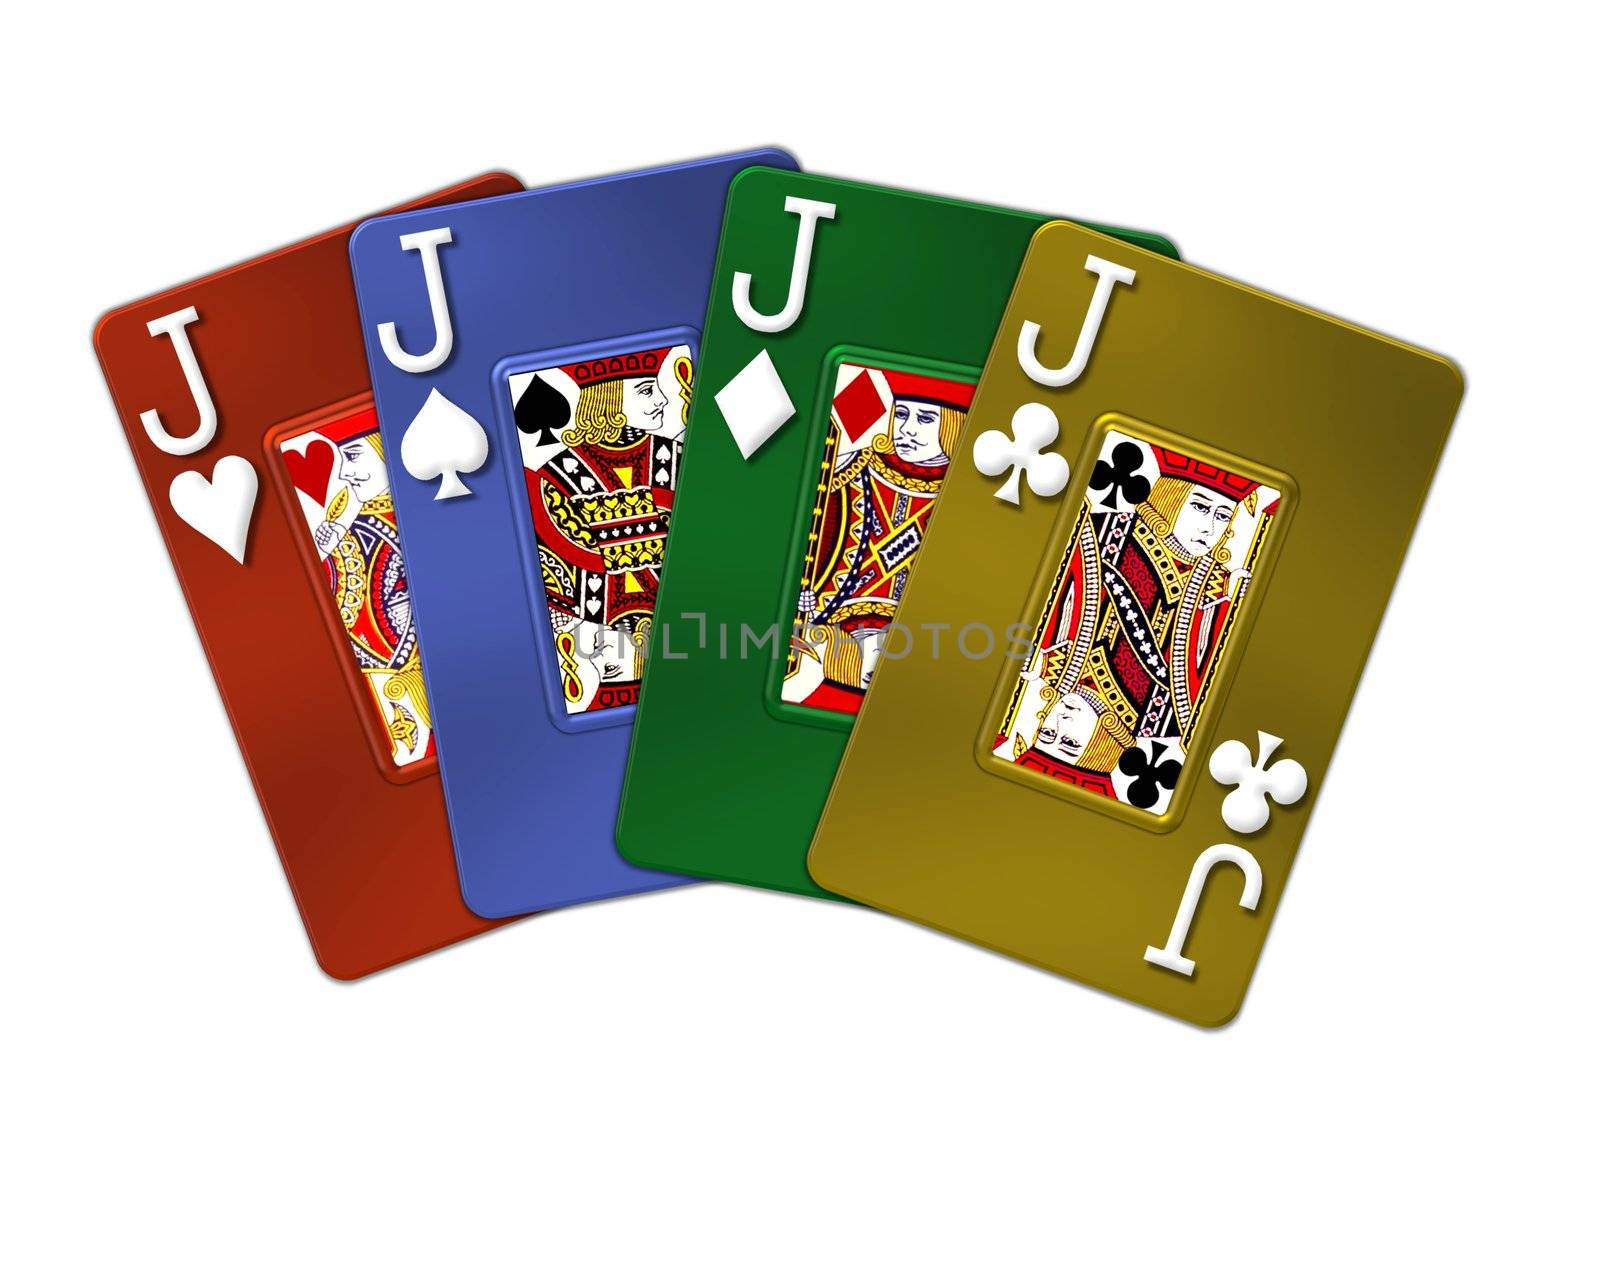 illustration of metallic poker cards - 4 of a kind jacks by peromarketing